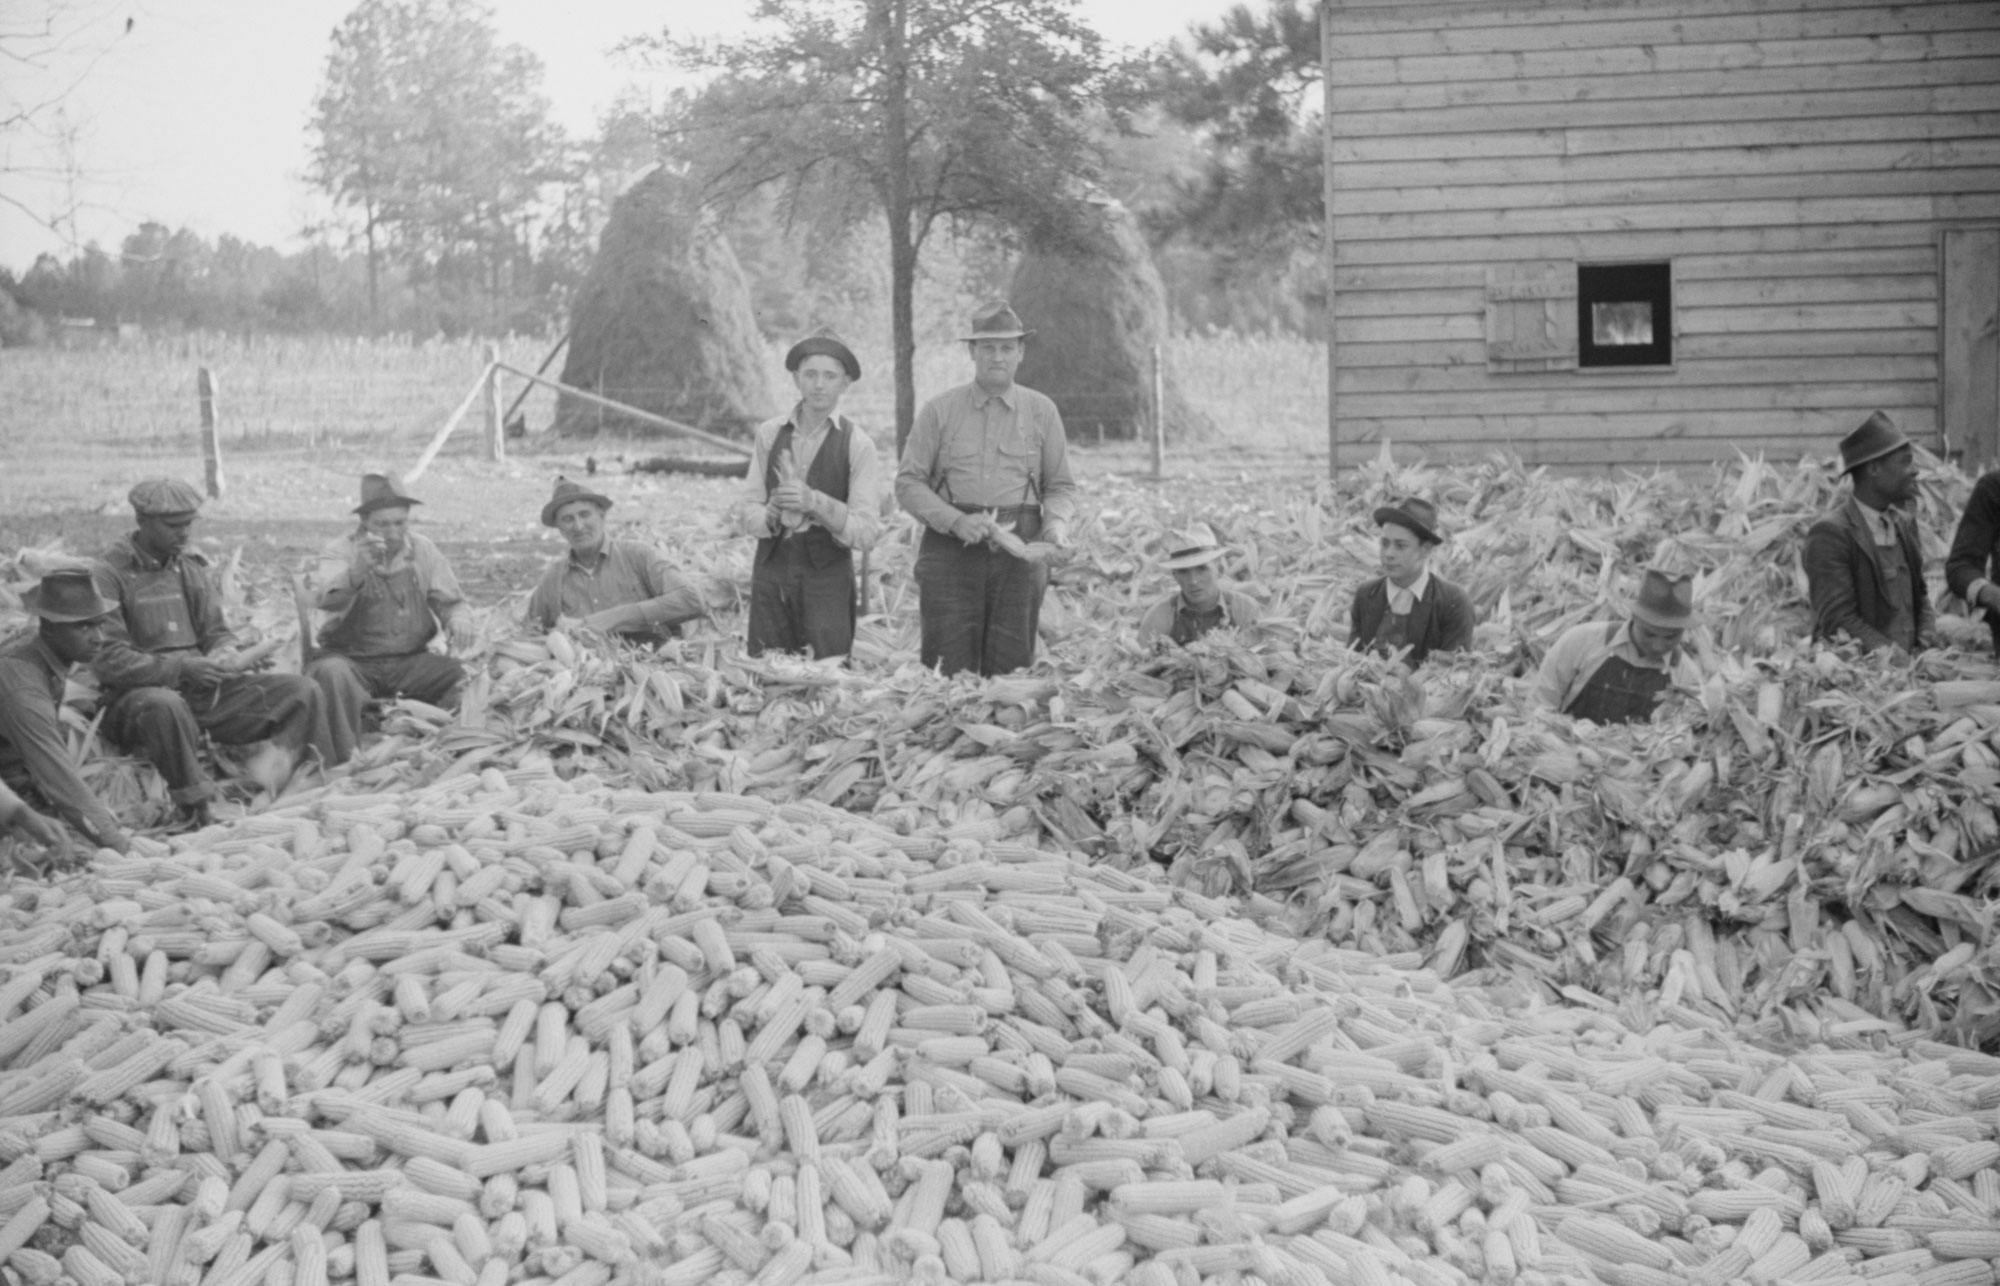 Black and white photograph of men husking corn in North Carolina, U.S.A., perhaps around 1939. The photo shows men standing and sitting around a pile of ears of corn; the men appear to include three Black men and seven white men. Their dress varies from overalls and shirts to button-down shirts with pants, and two men are wearing suits. All of the men have hats on. A few can be seen holding ears of corn, in the process of husking them. A wood-sided building stands in the upper right.